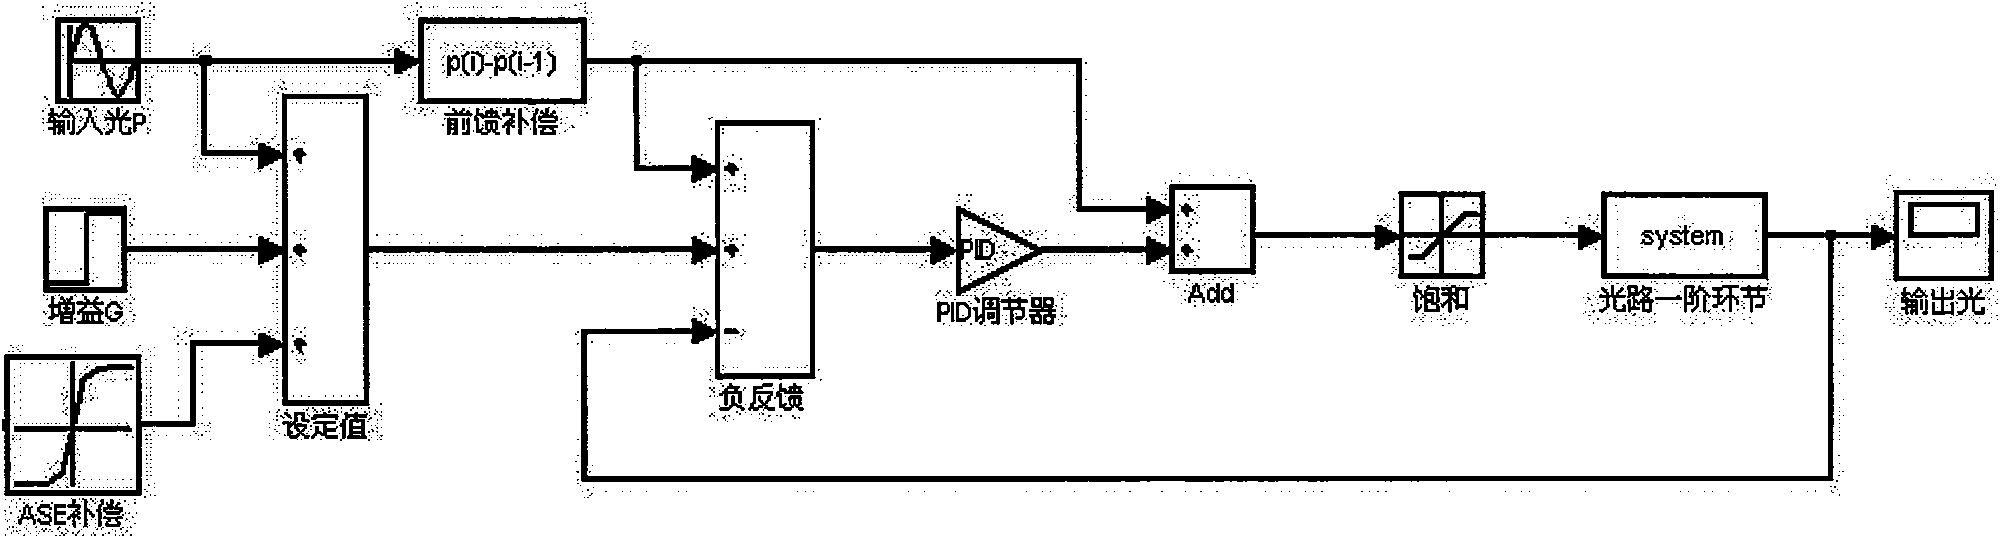 Device for locking gain and power in erbium-doped fiber amplifier (EDFA) by using digital signal processor (DSP)